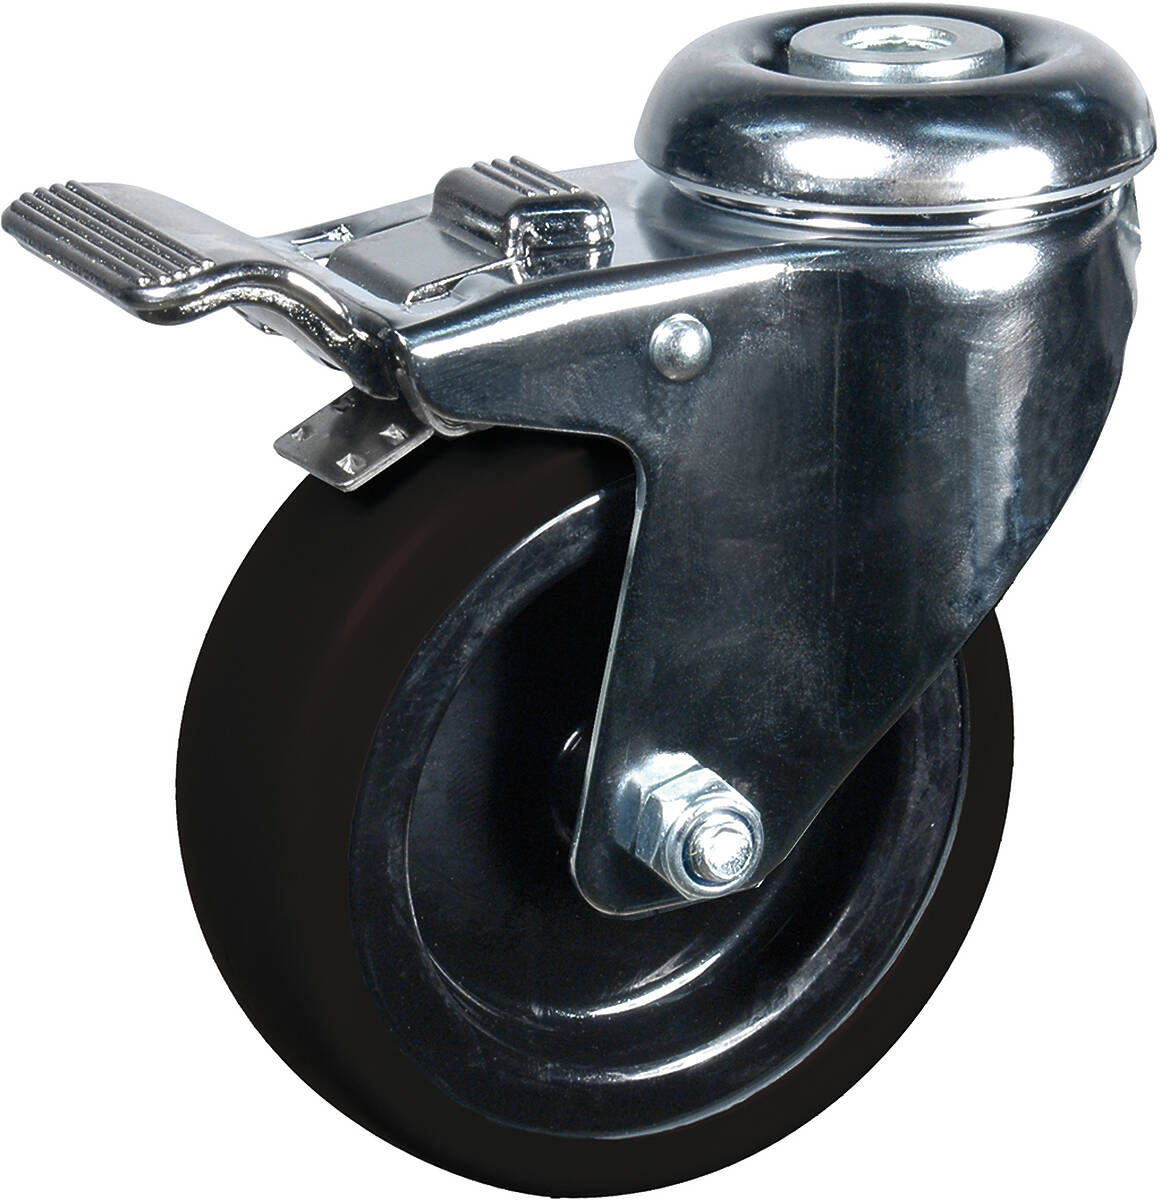 Unicol BC10 1 x 10cm Heavy duty braked castor product image. Click to enlarge.